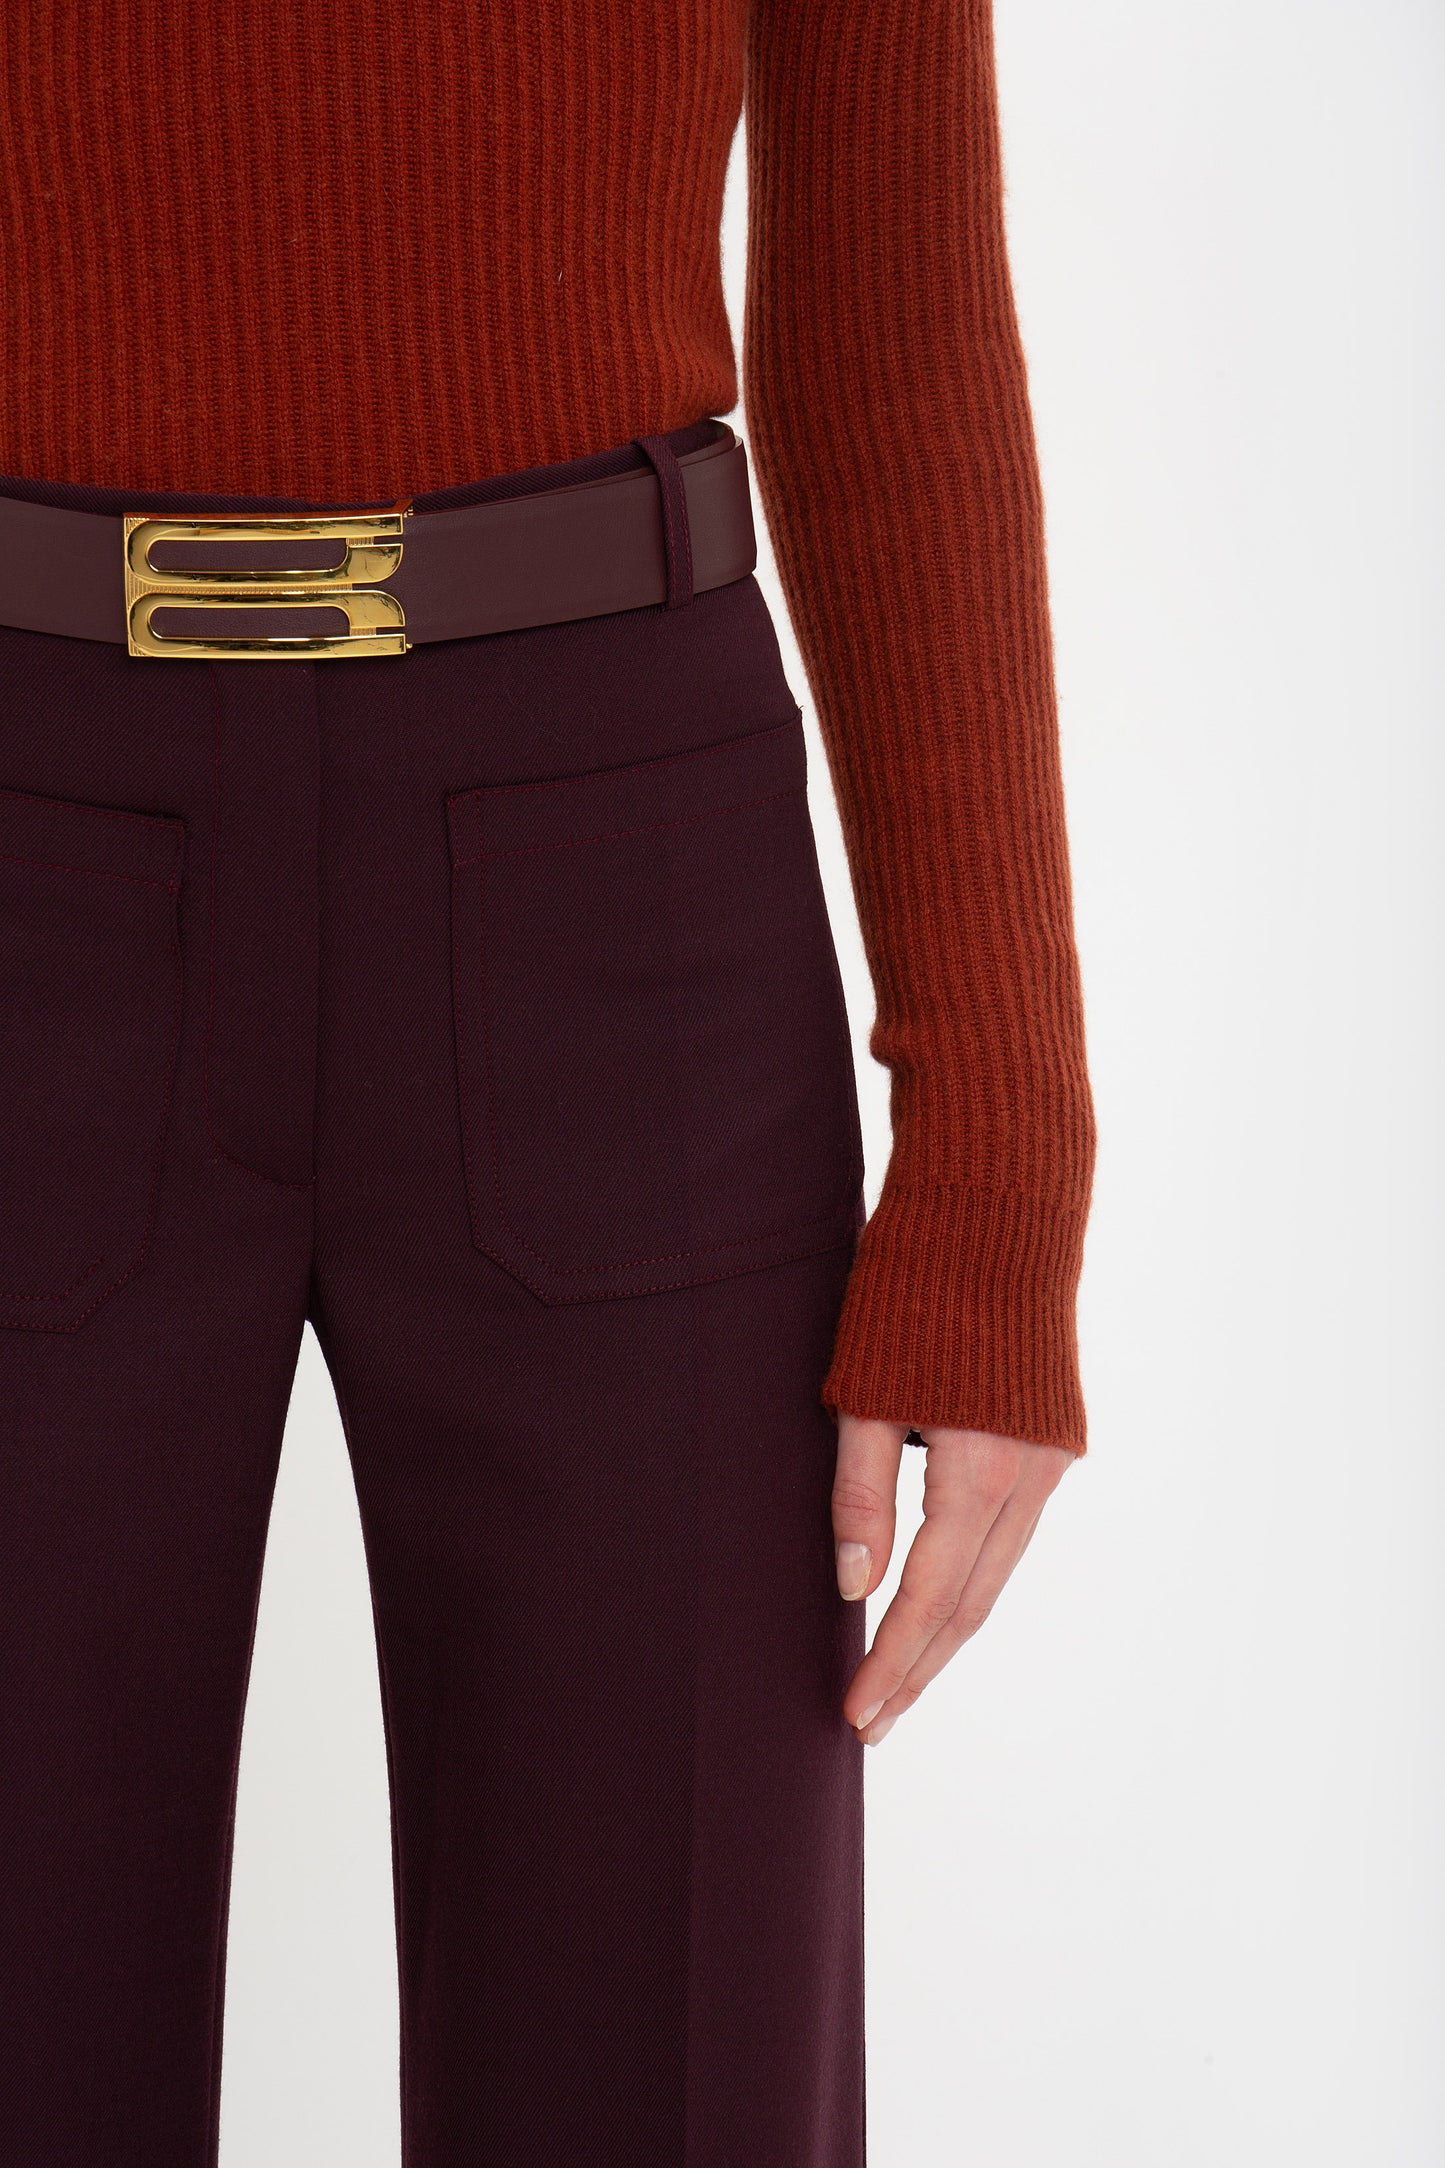 Person wearing a rust-colored, Victoria Beckham Double Collared Jumper In Russet, burgundy pants, and a wide brown belt with a gold buckle, shown from the waist down.